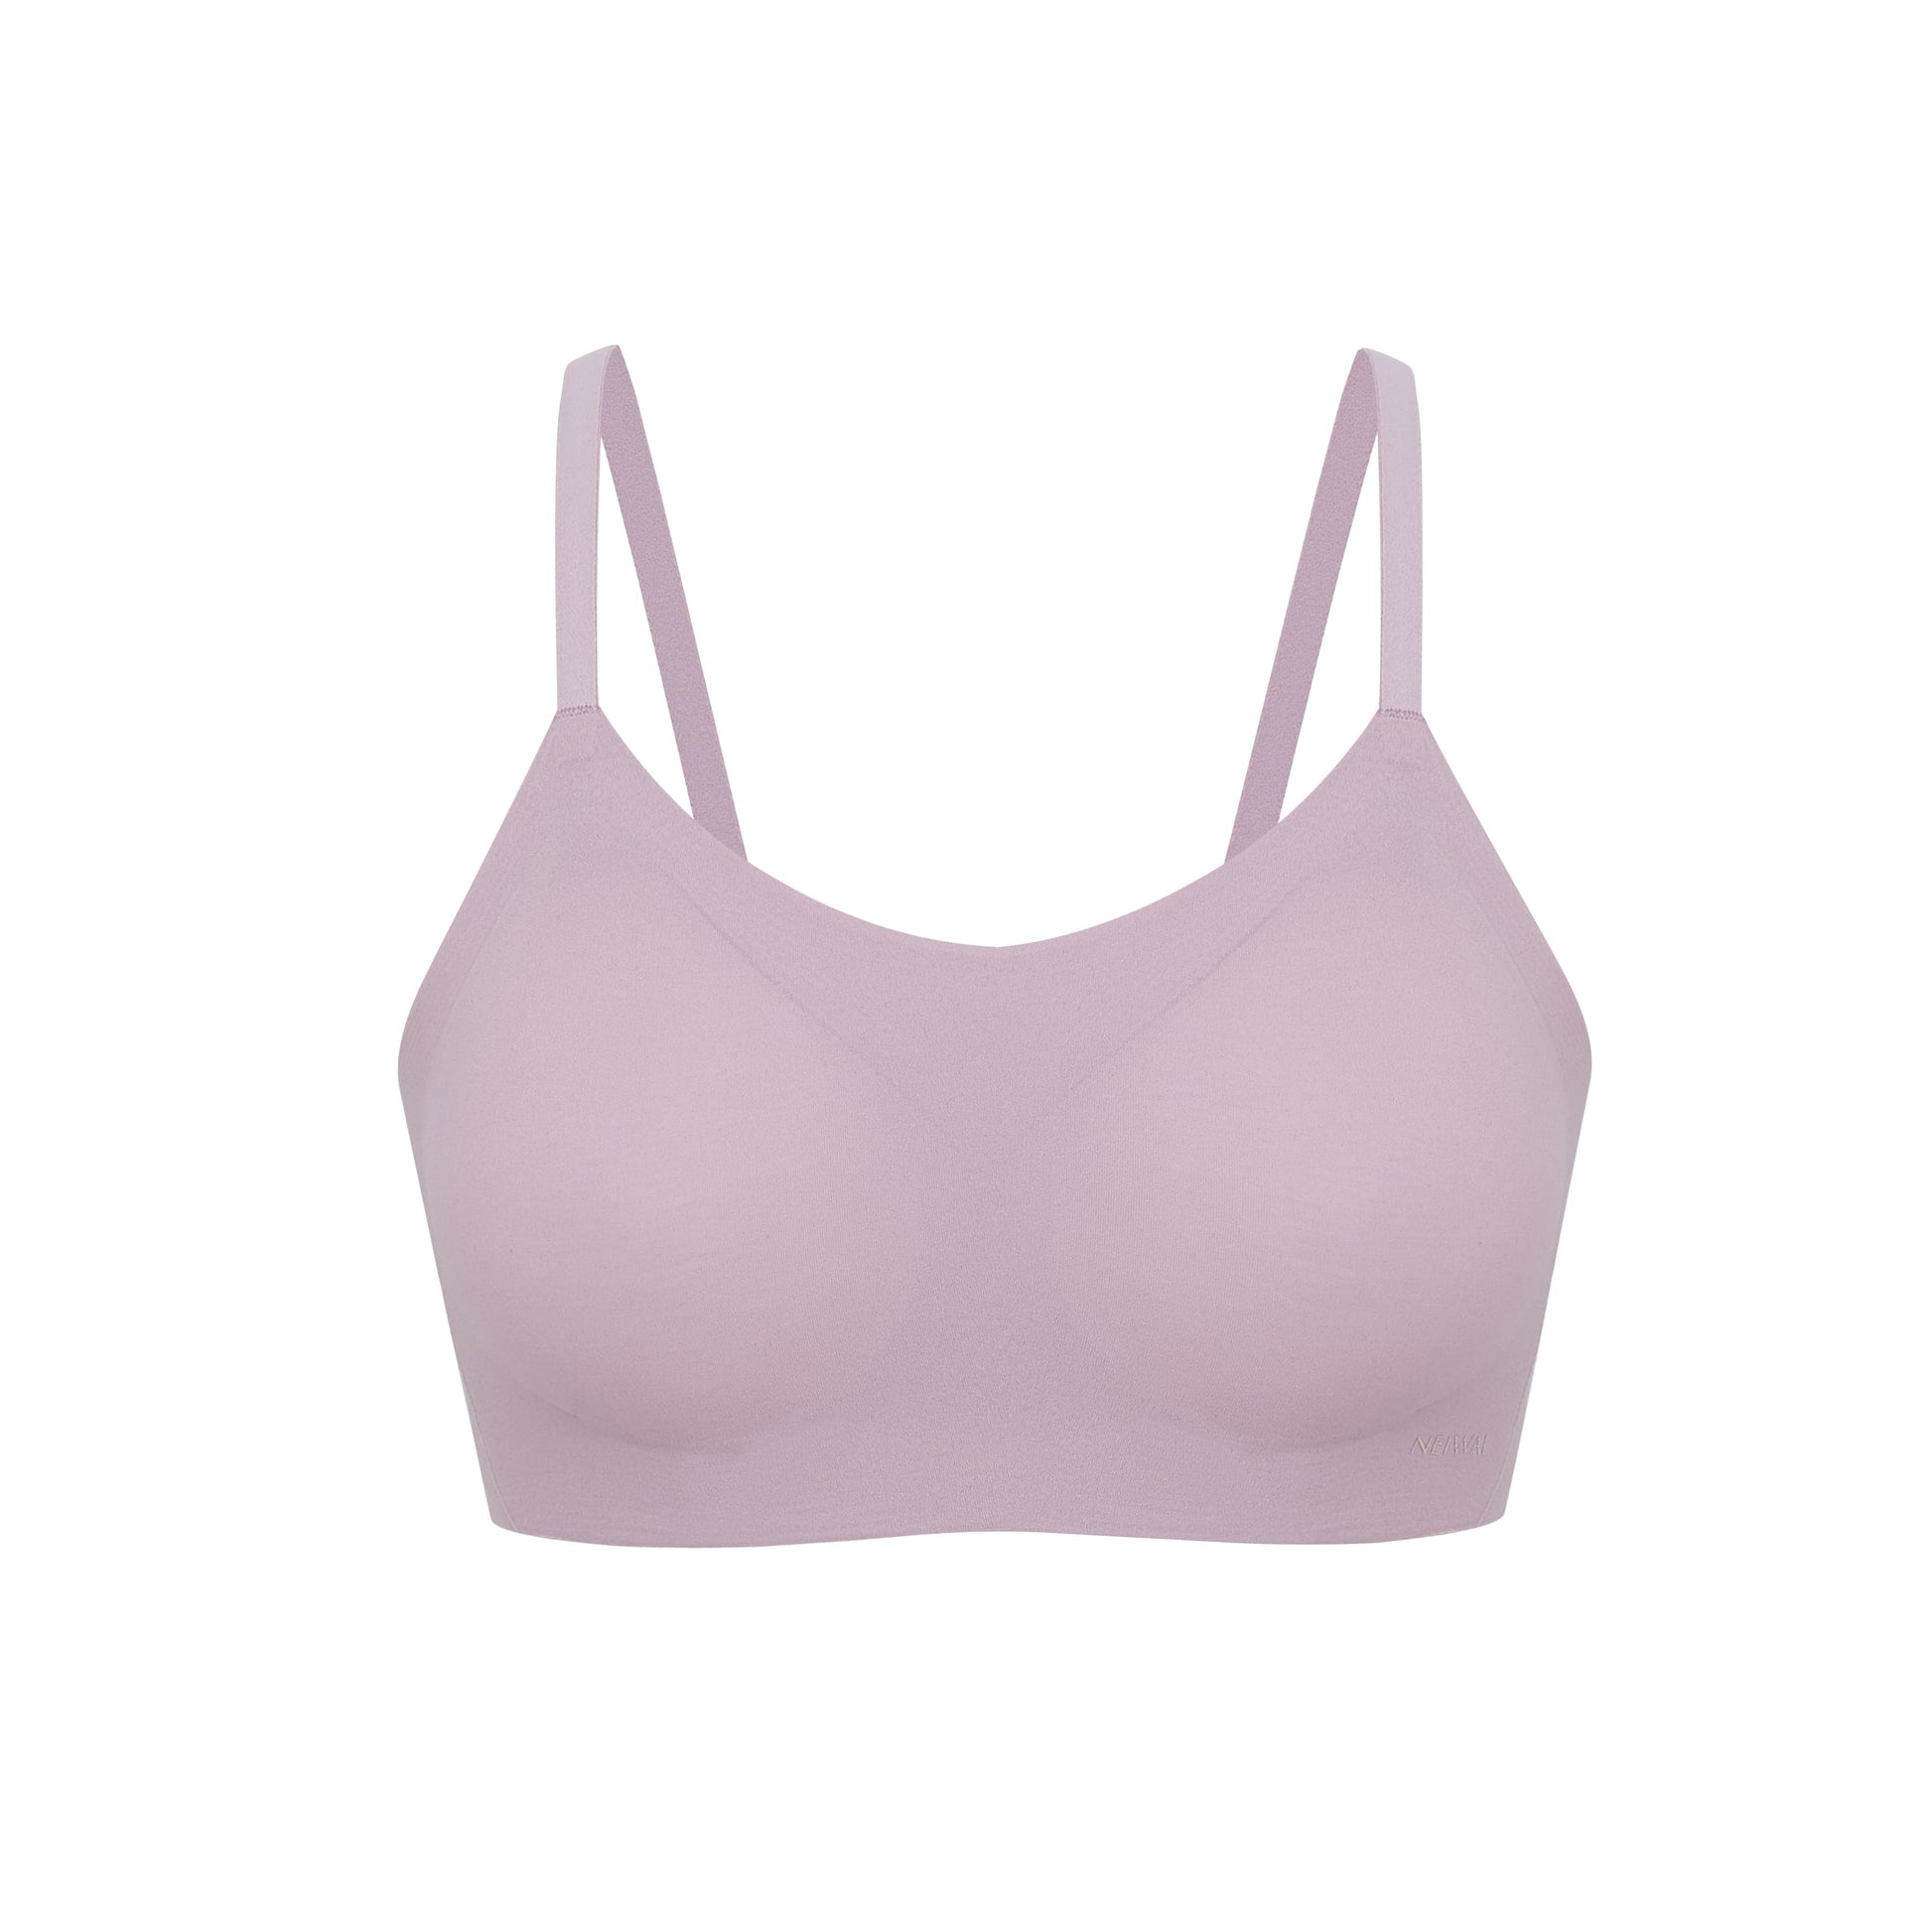 Pro-Fit seamless small light pink sports bra with no inside pads or padding.